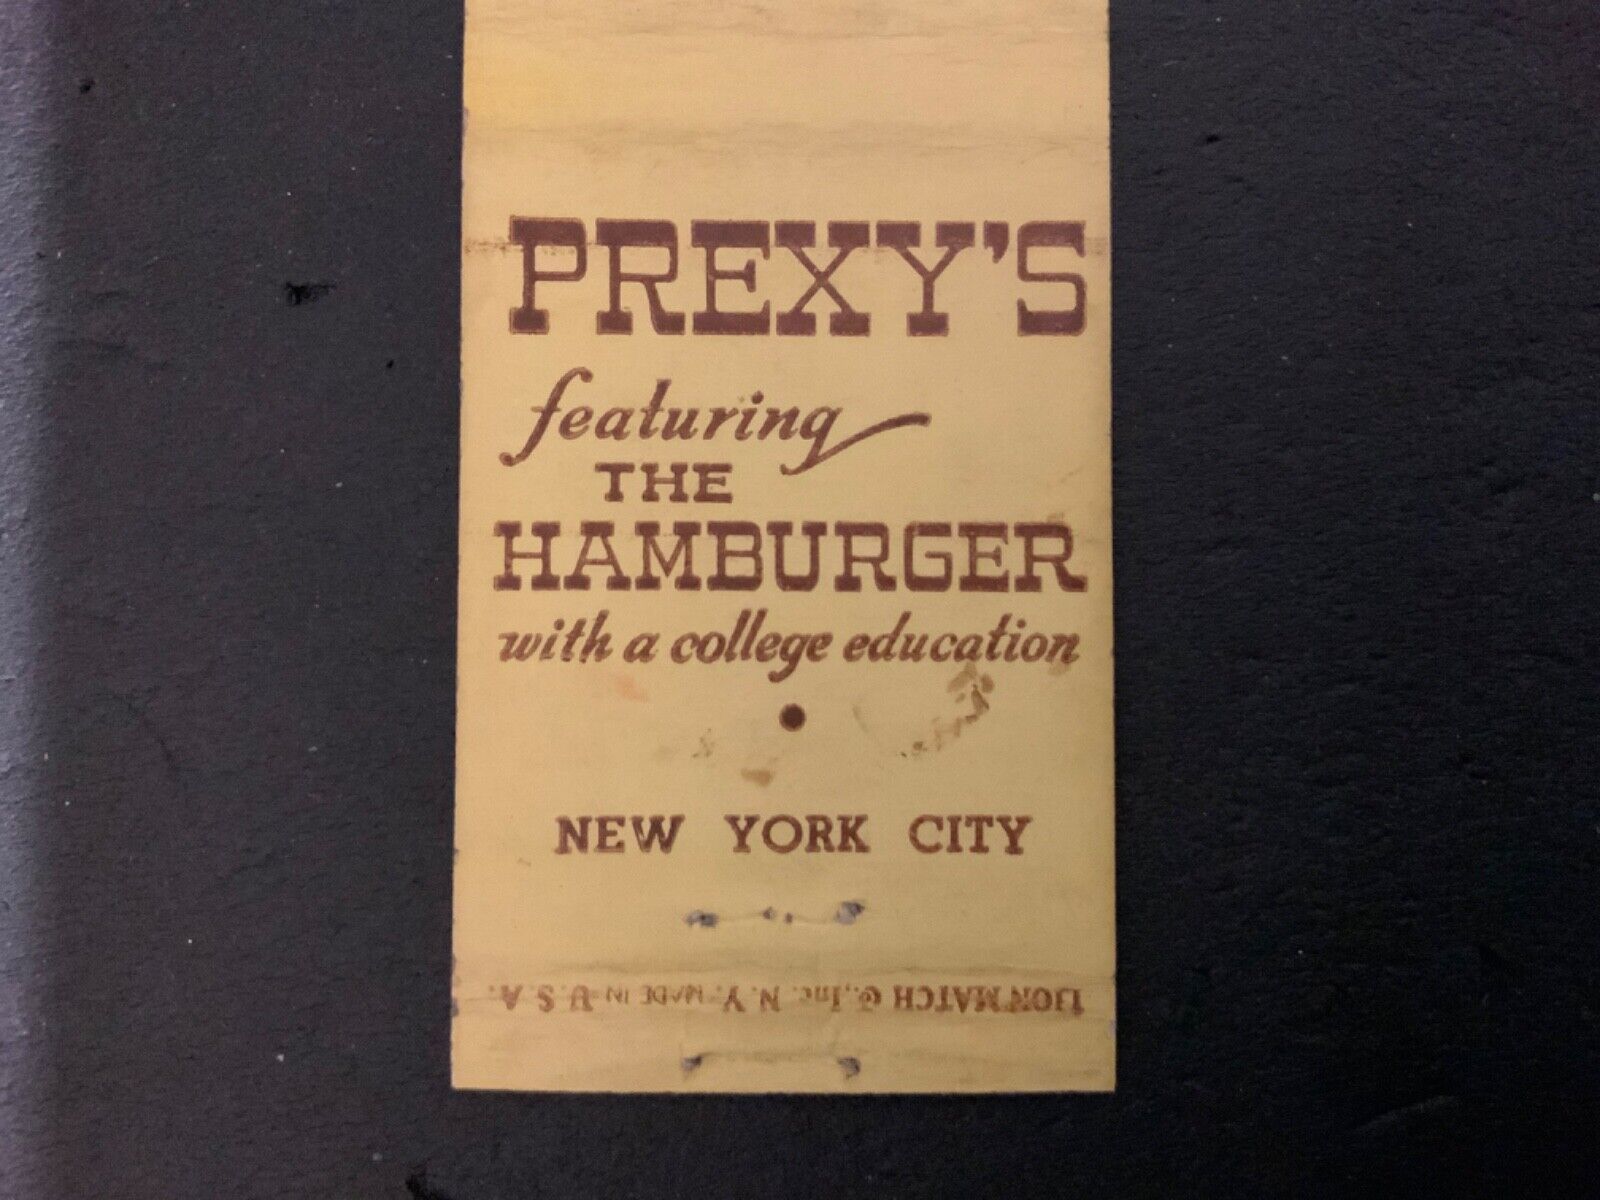 1930s-40s+MATCHBOOK -HAMBURGER with a college education - PREXY’S - NYC - # 2591